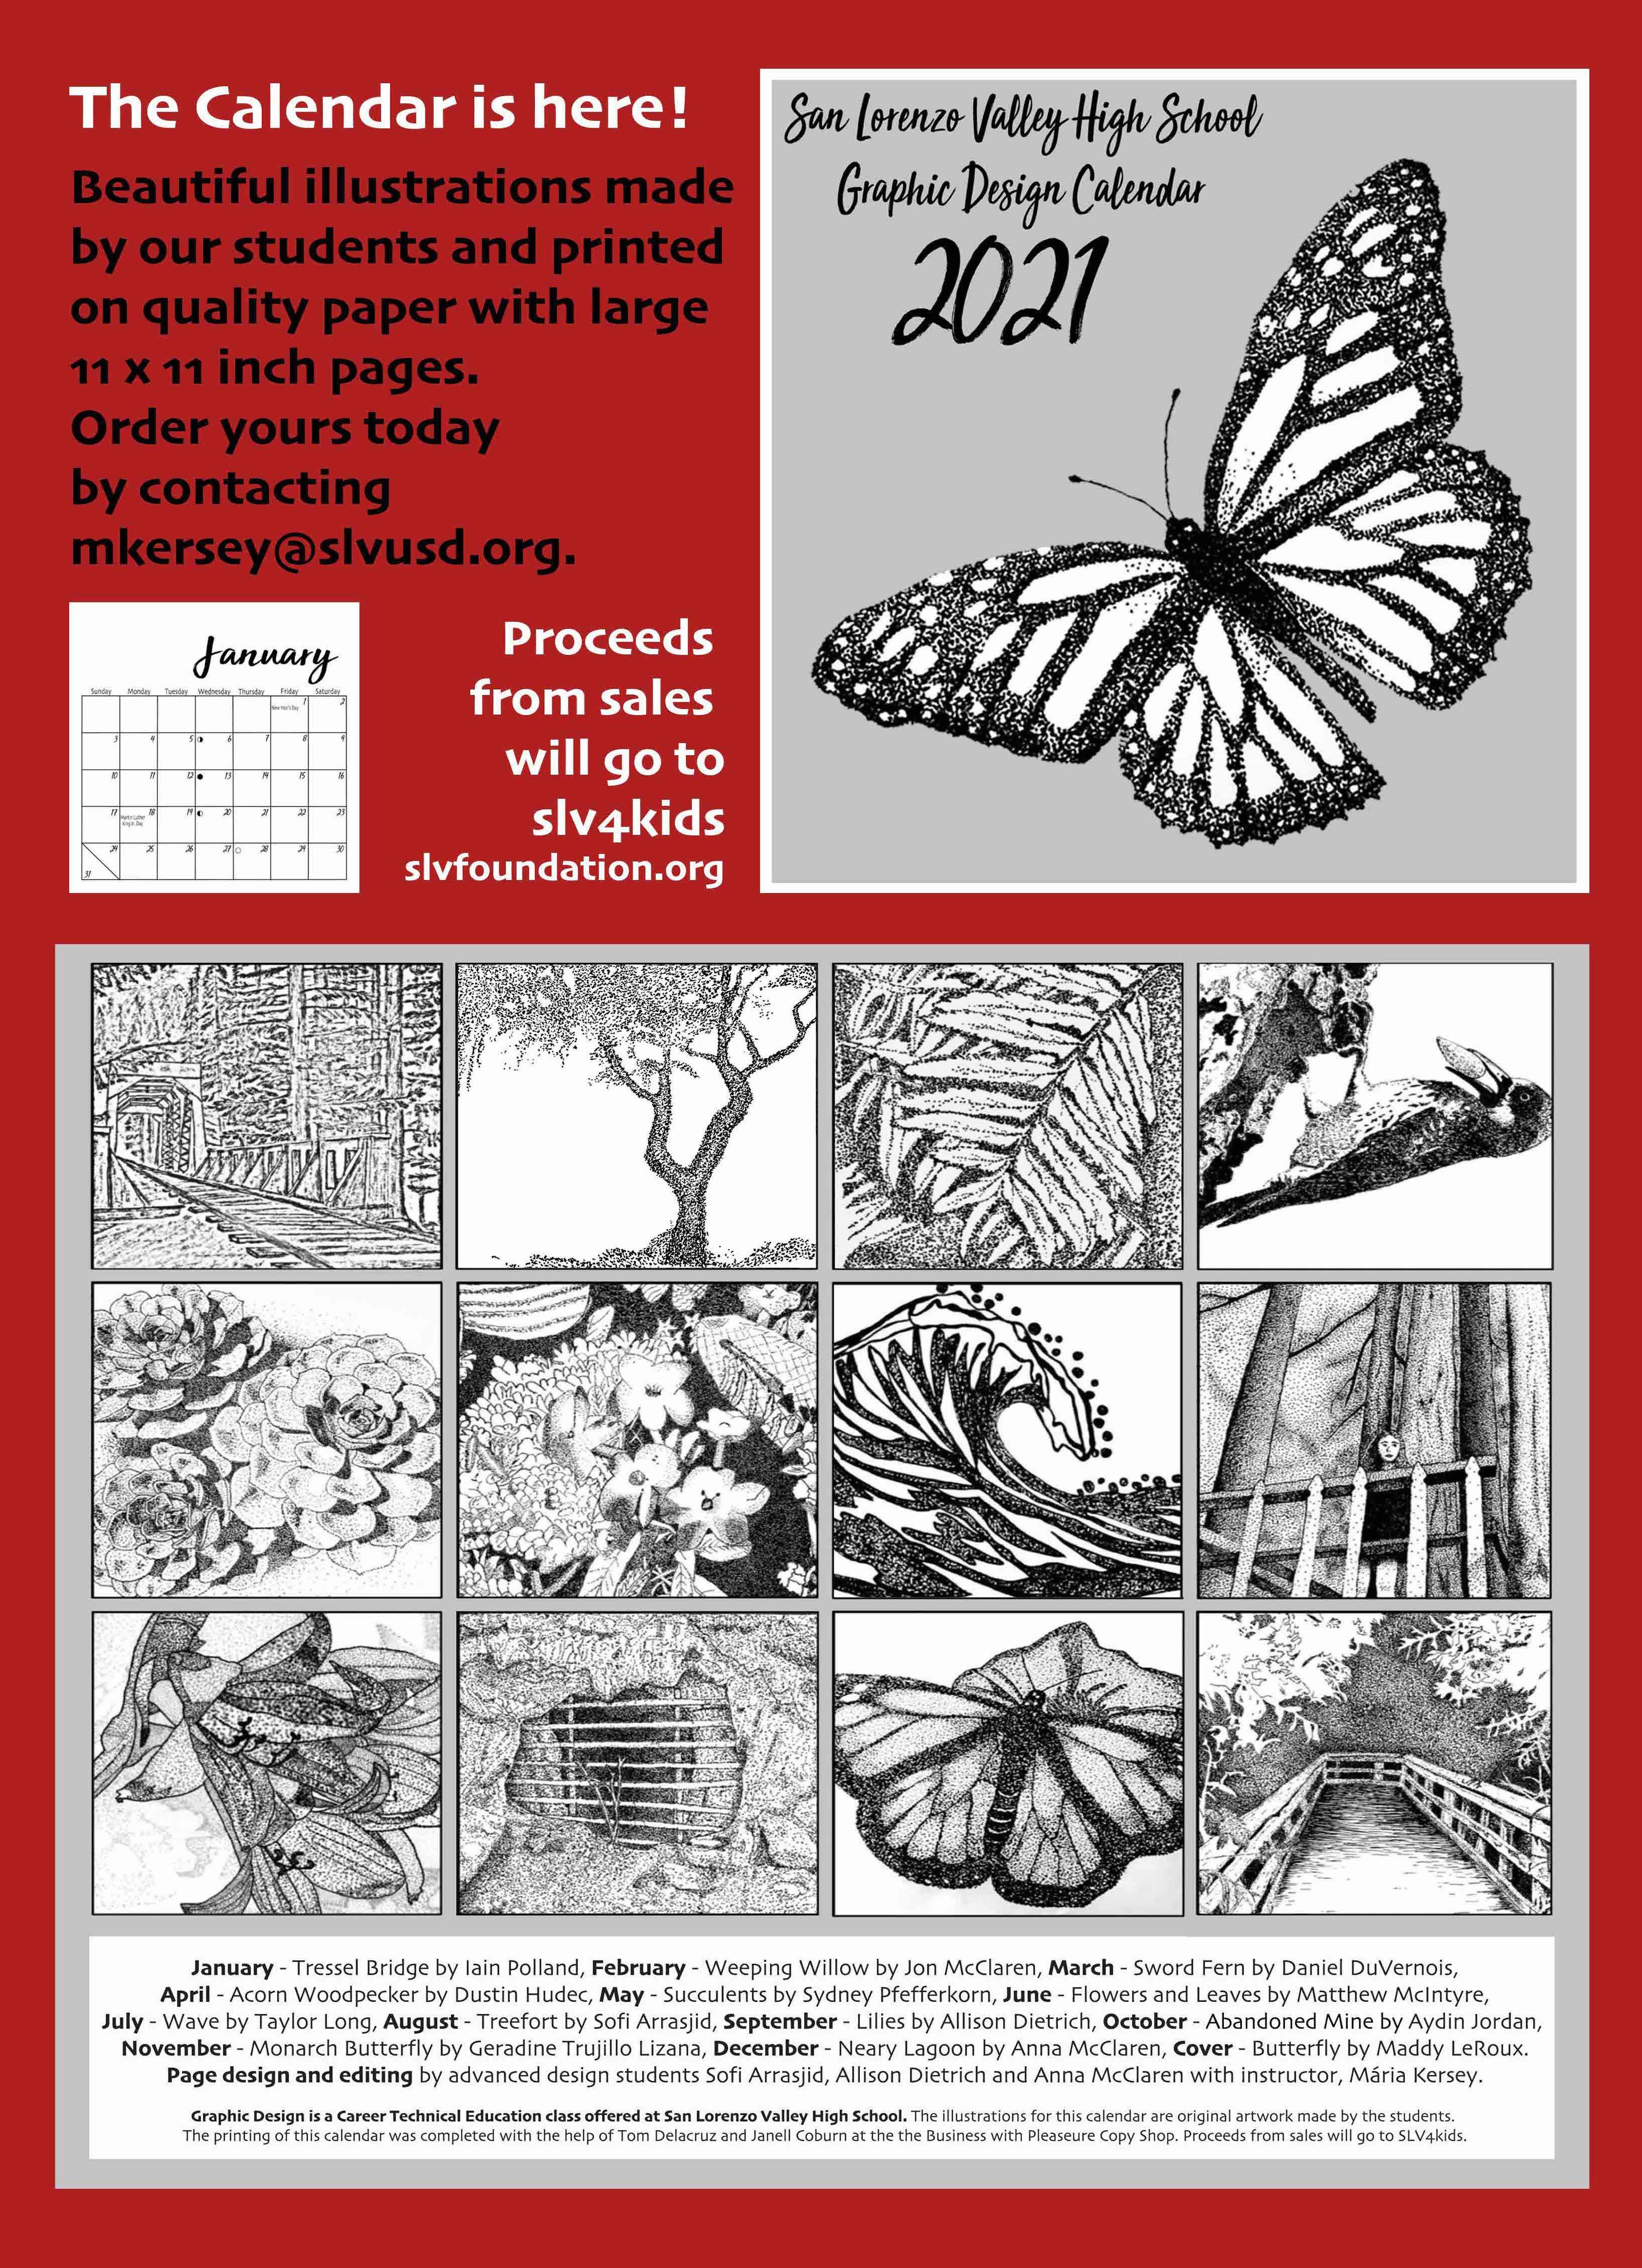 2021 SLVHS Calendar available; email mkersey@slvusd.org for information